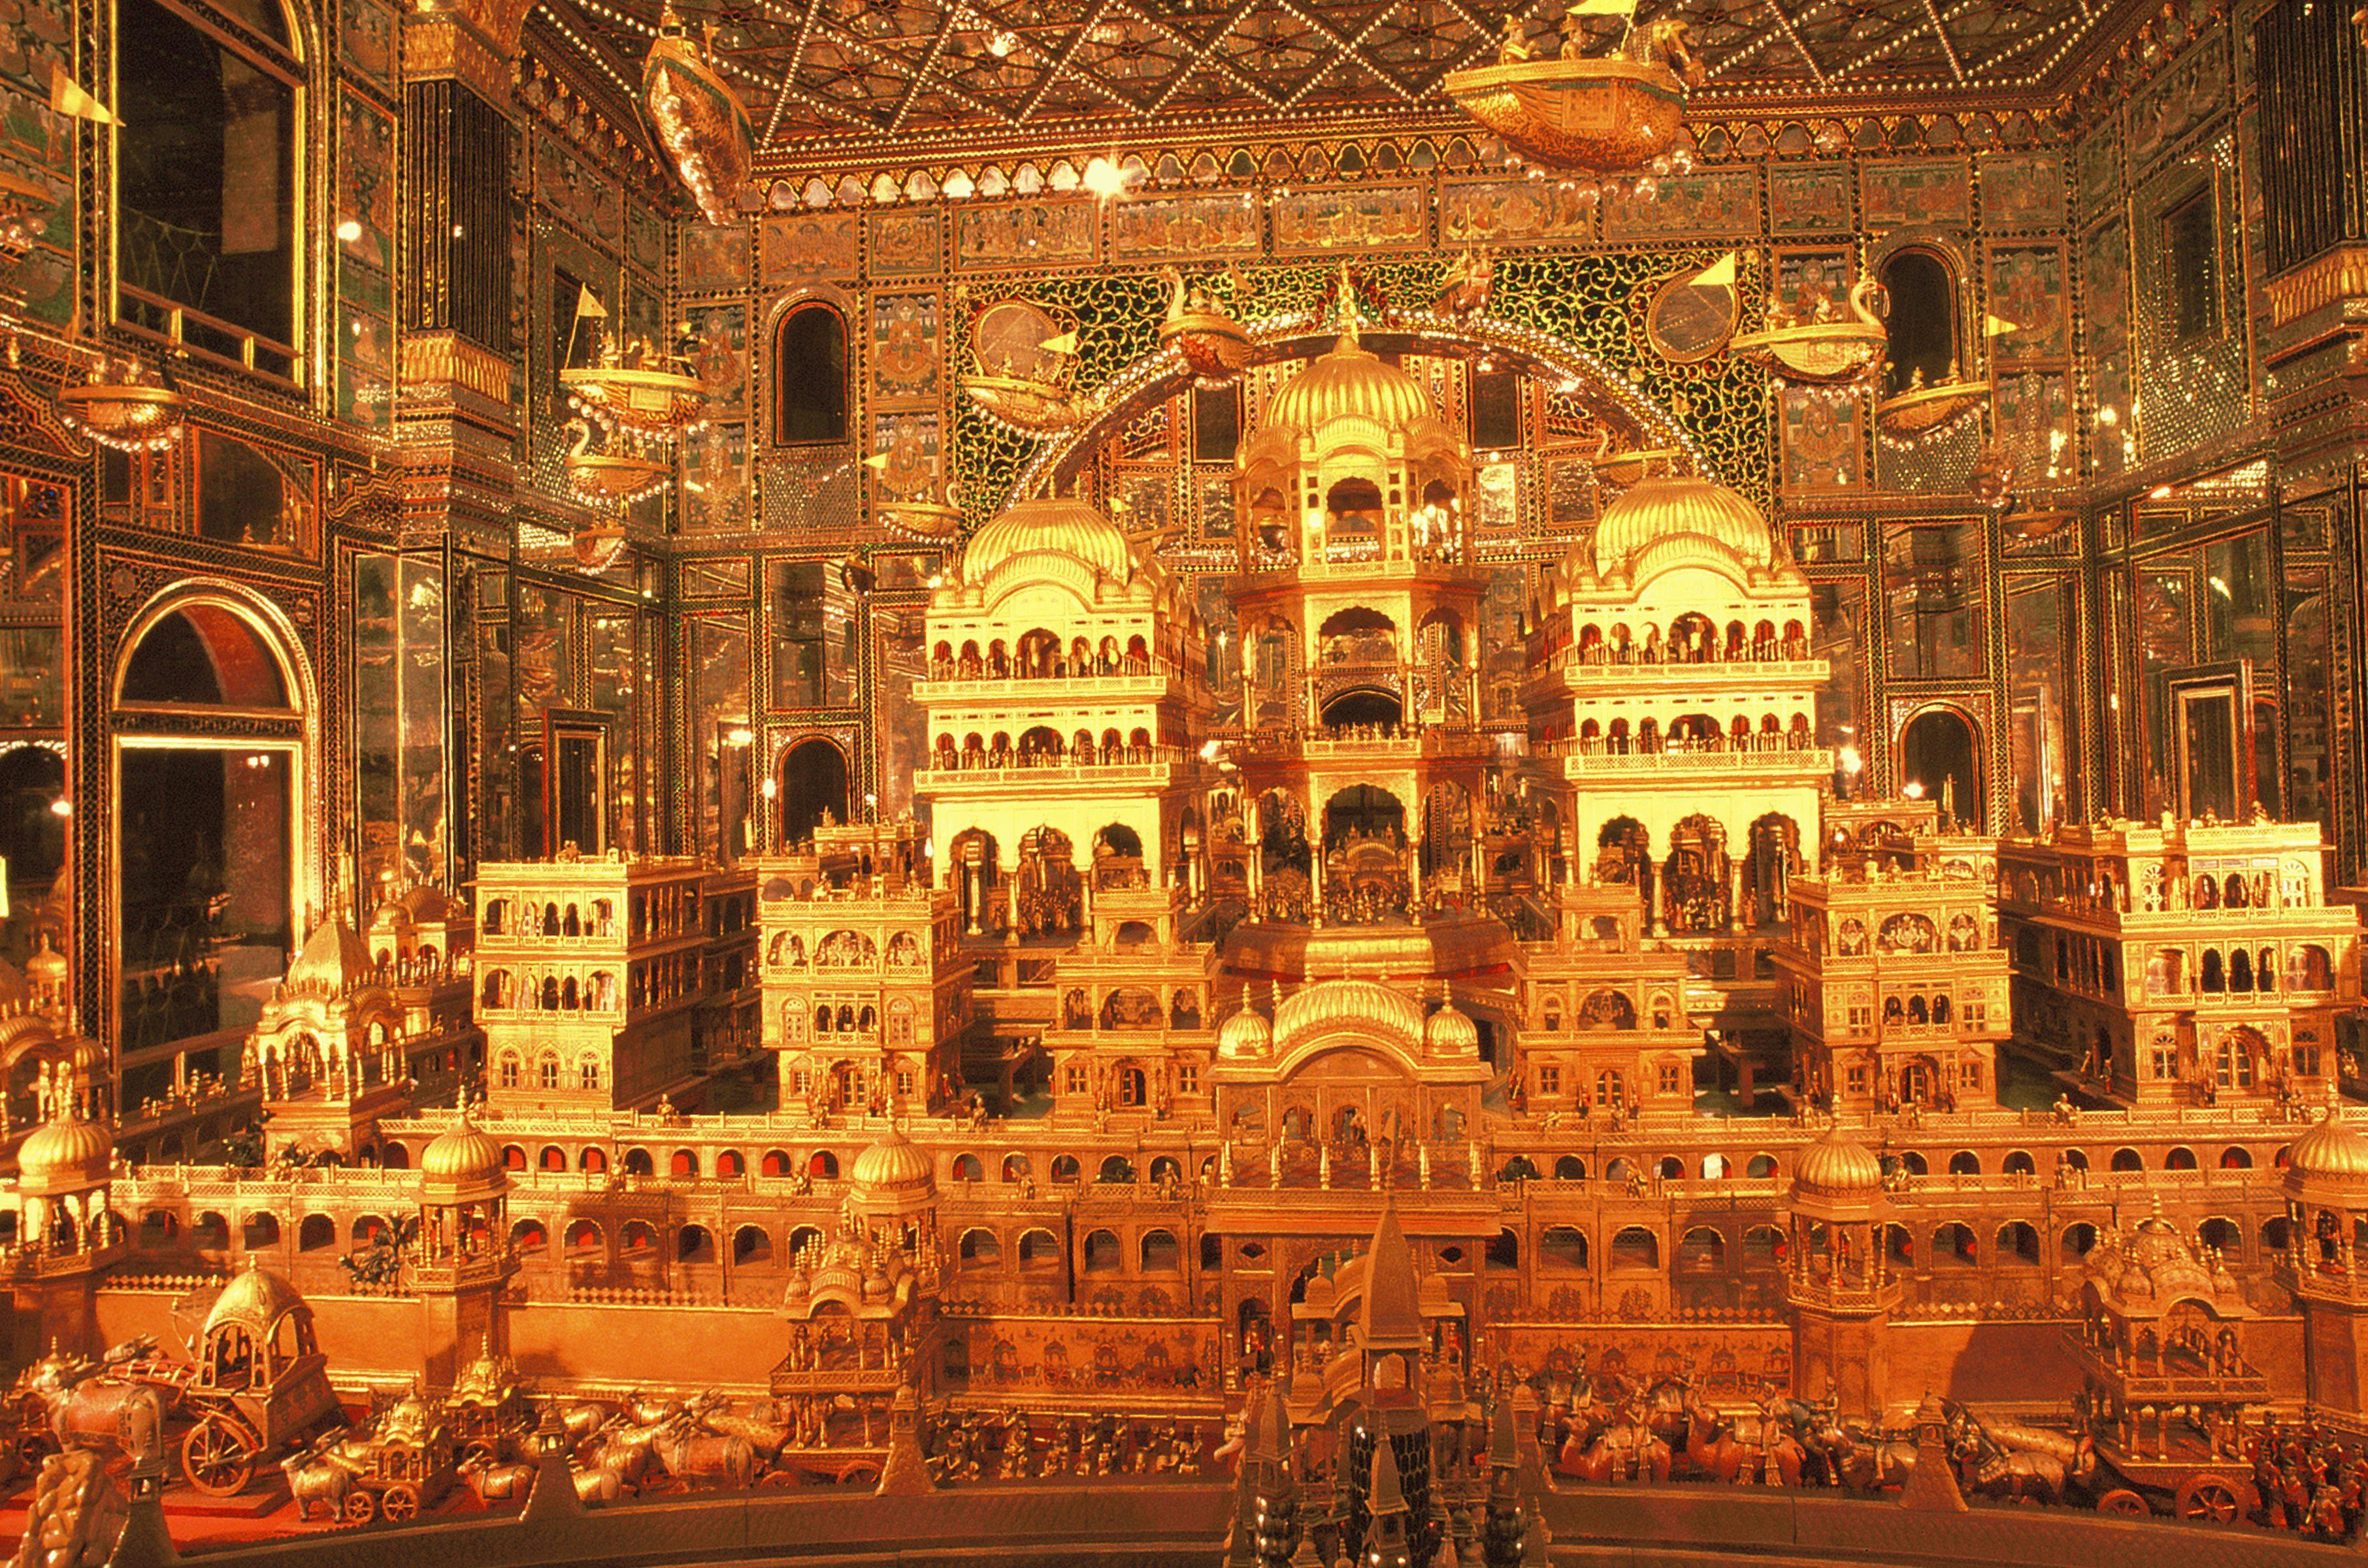 Gold carving depiction of the legendary Ayodhya at the Ajmer Jain temple